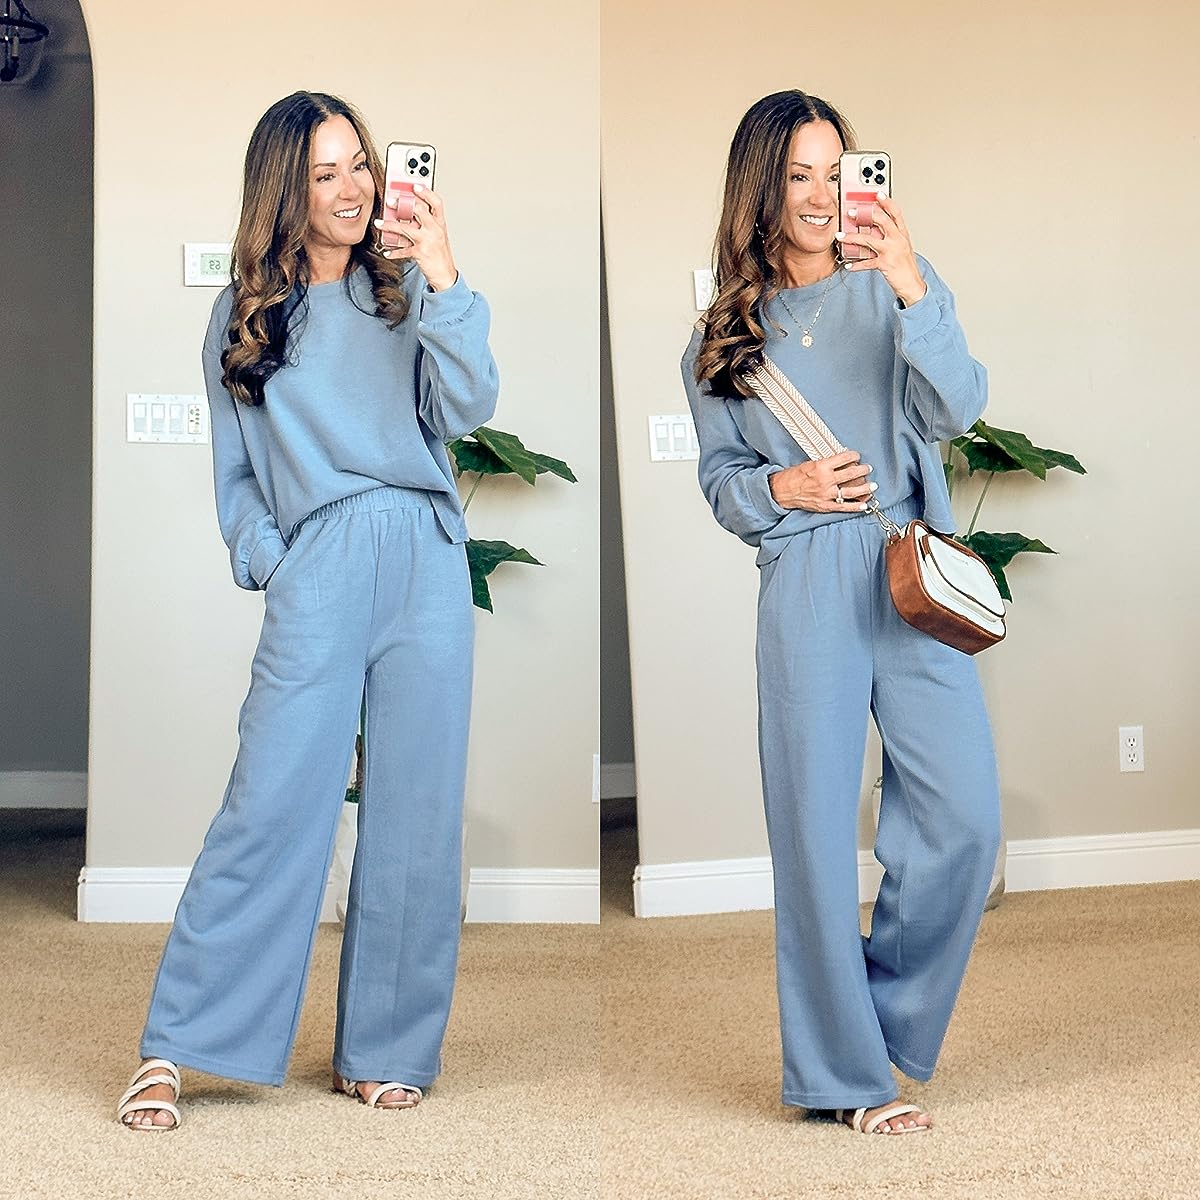 The Best Loungewear and Cozy Finds for this Fall | #best #loungewear #cozy #finds #fall #twopiece #set #comfy #relax #lazy #sandals #jewelry #best